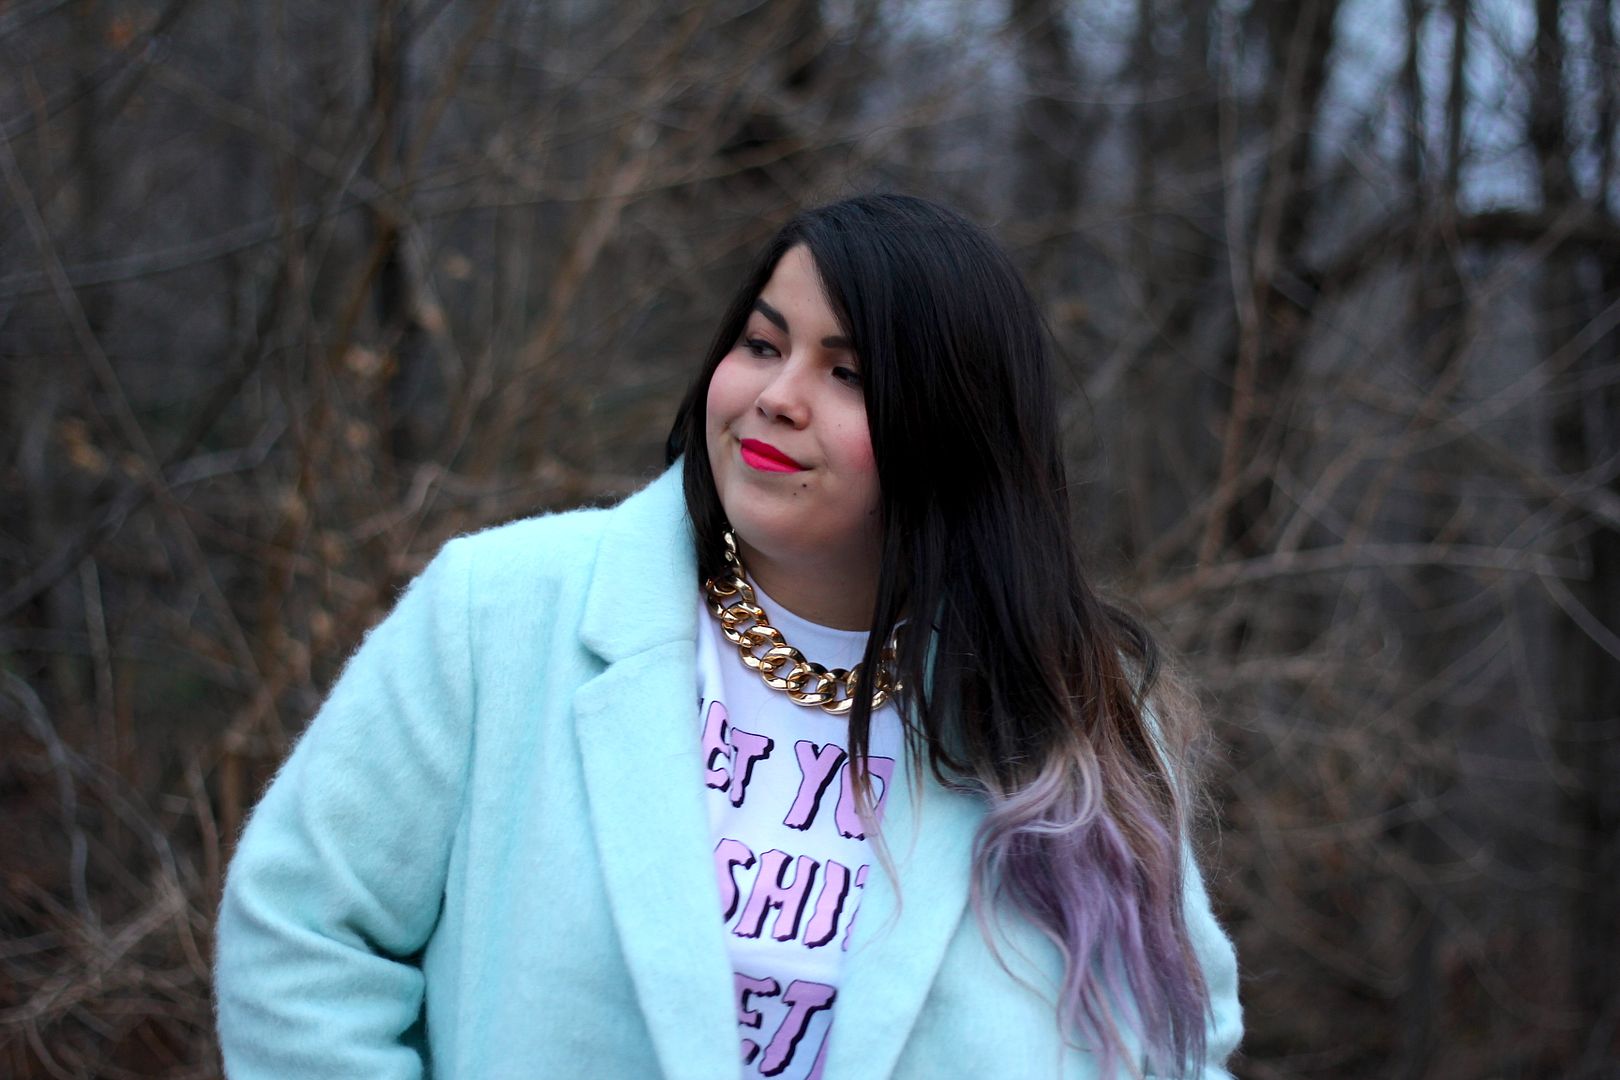 plus size fashion jessica ip get your shit together sweater black leather skirt old navy wooly mint coat plus canada